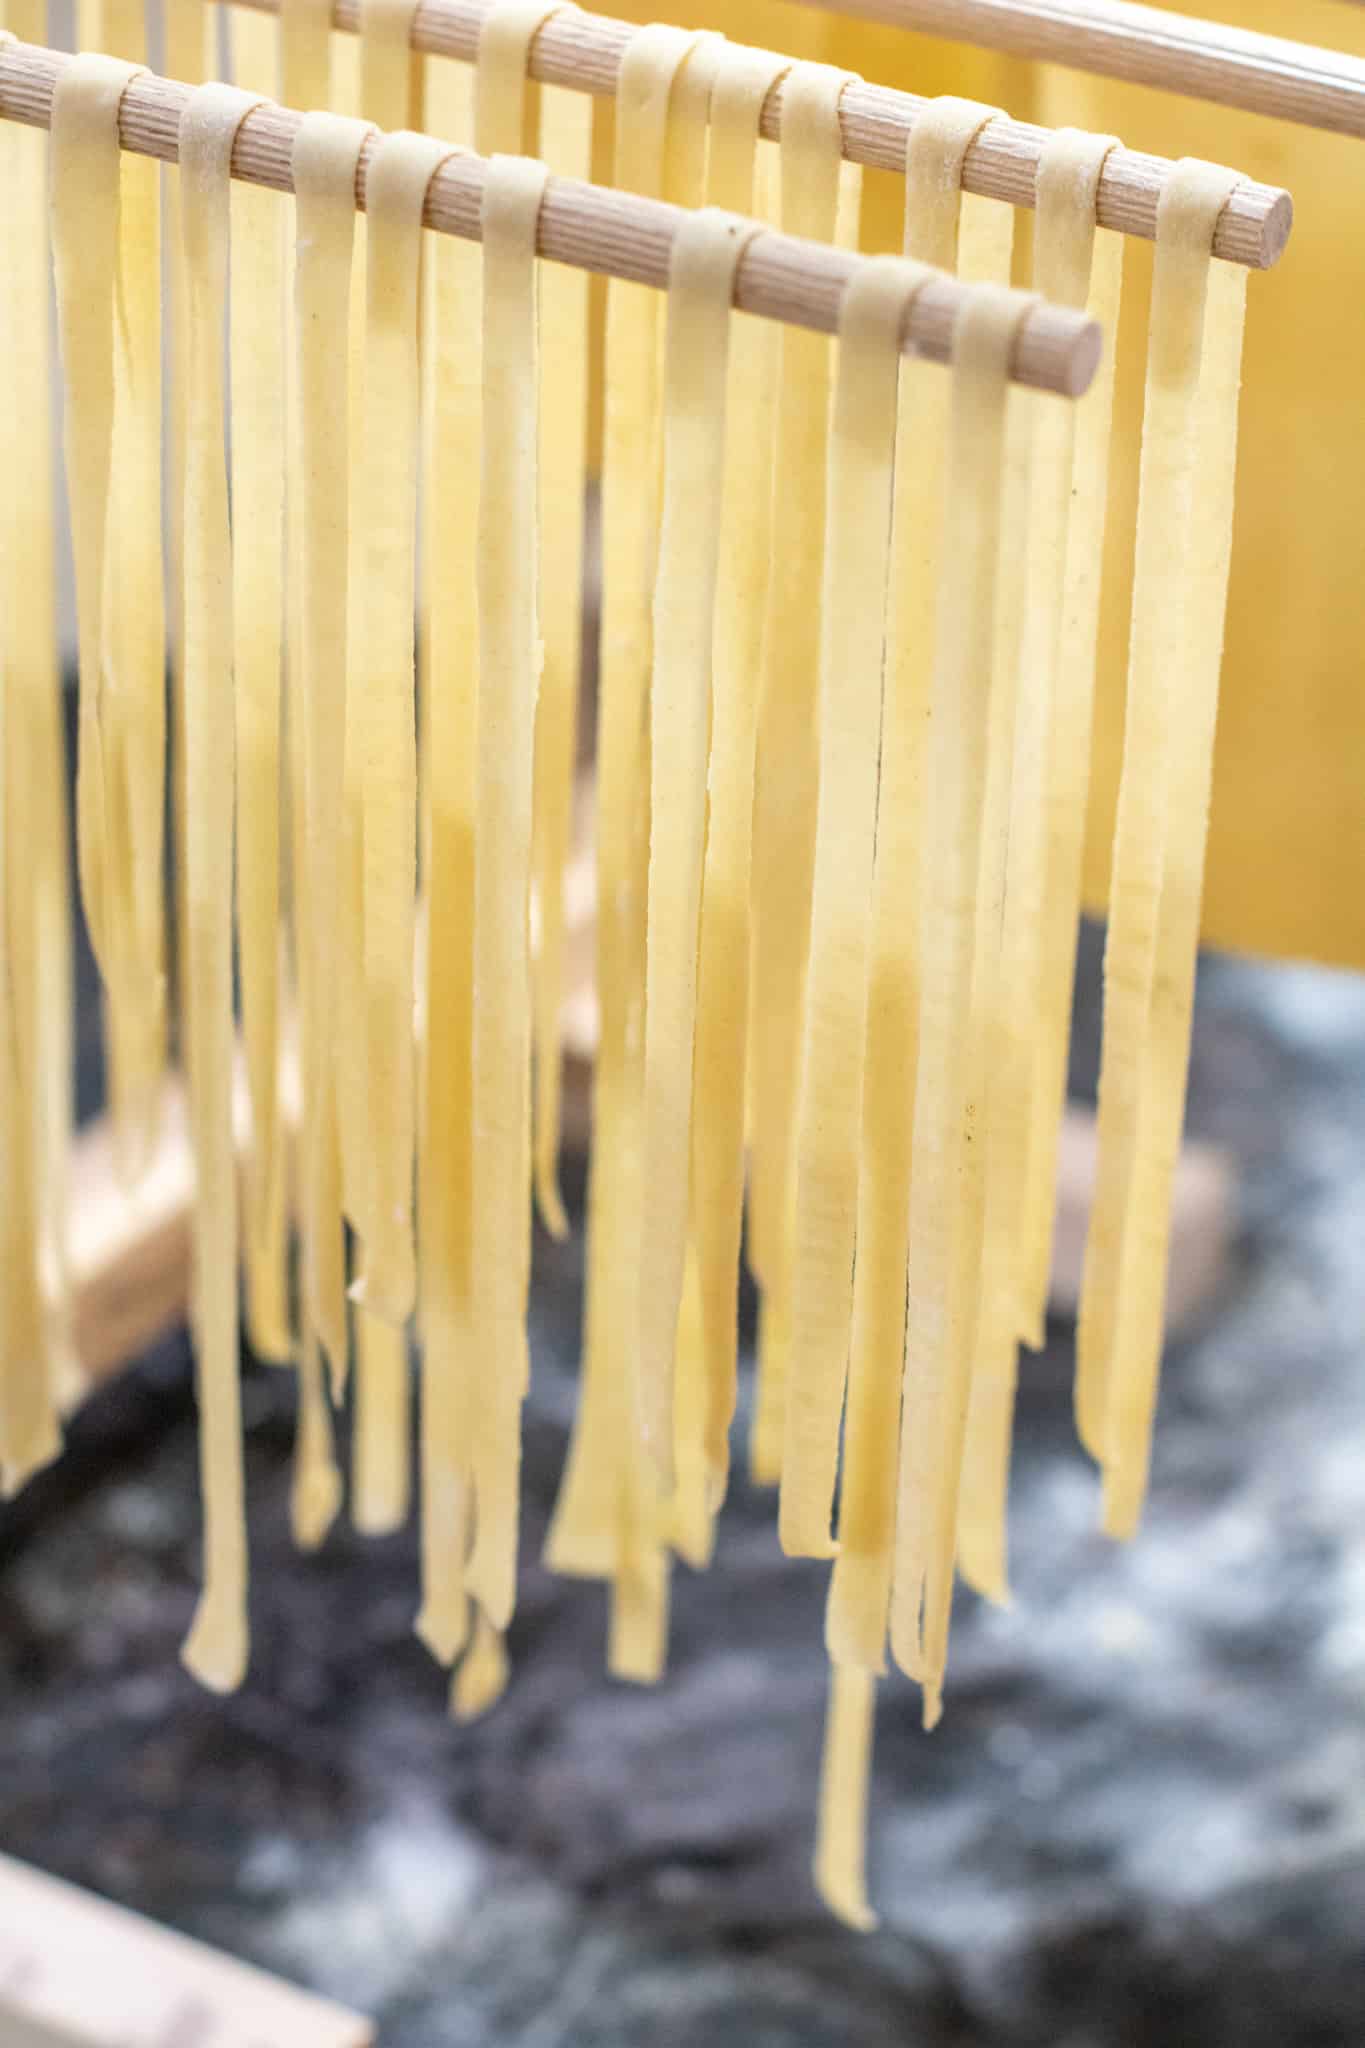 Homemade Fresh Pasta Recipe - Ingredients and How to Make It